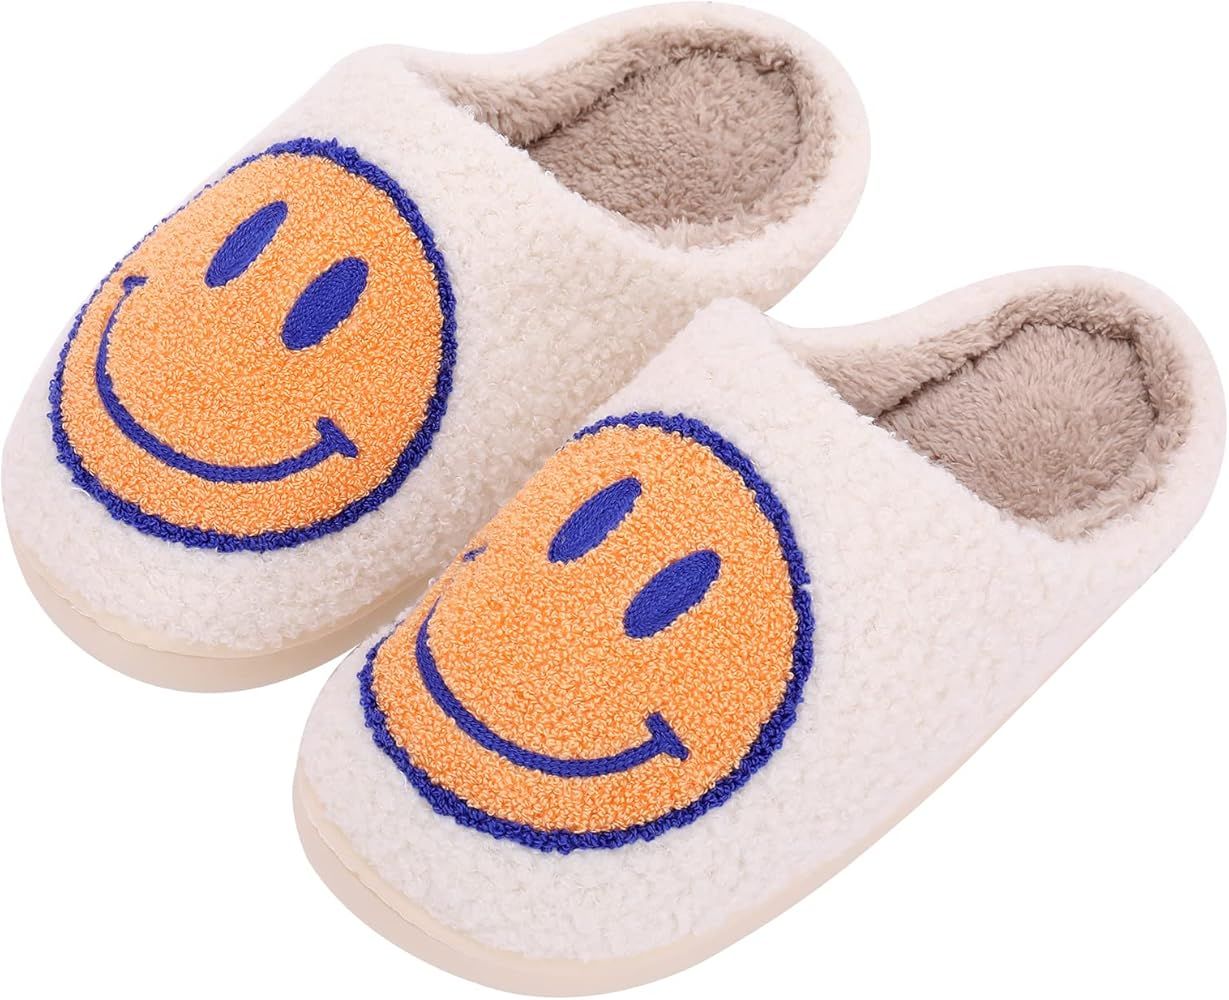 Retro Smiley Face Slippers Bad Cute Bunny Slippers Soft Plush Comfy Warm Fuzzy Slippers Women's C... | Amazon (US)